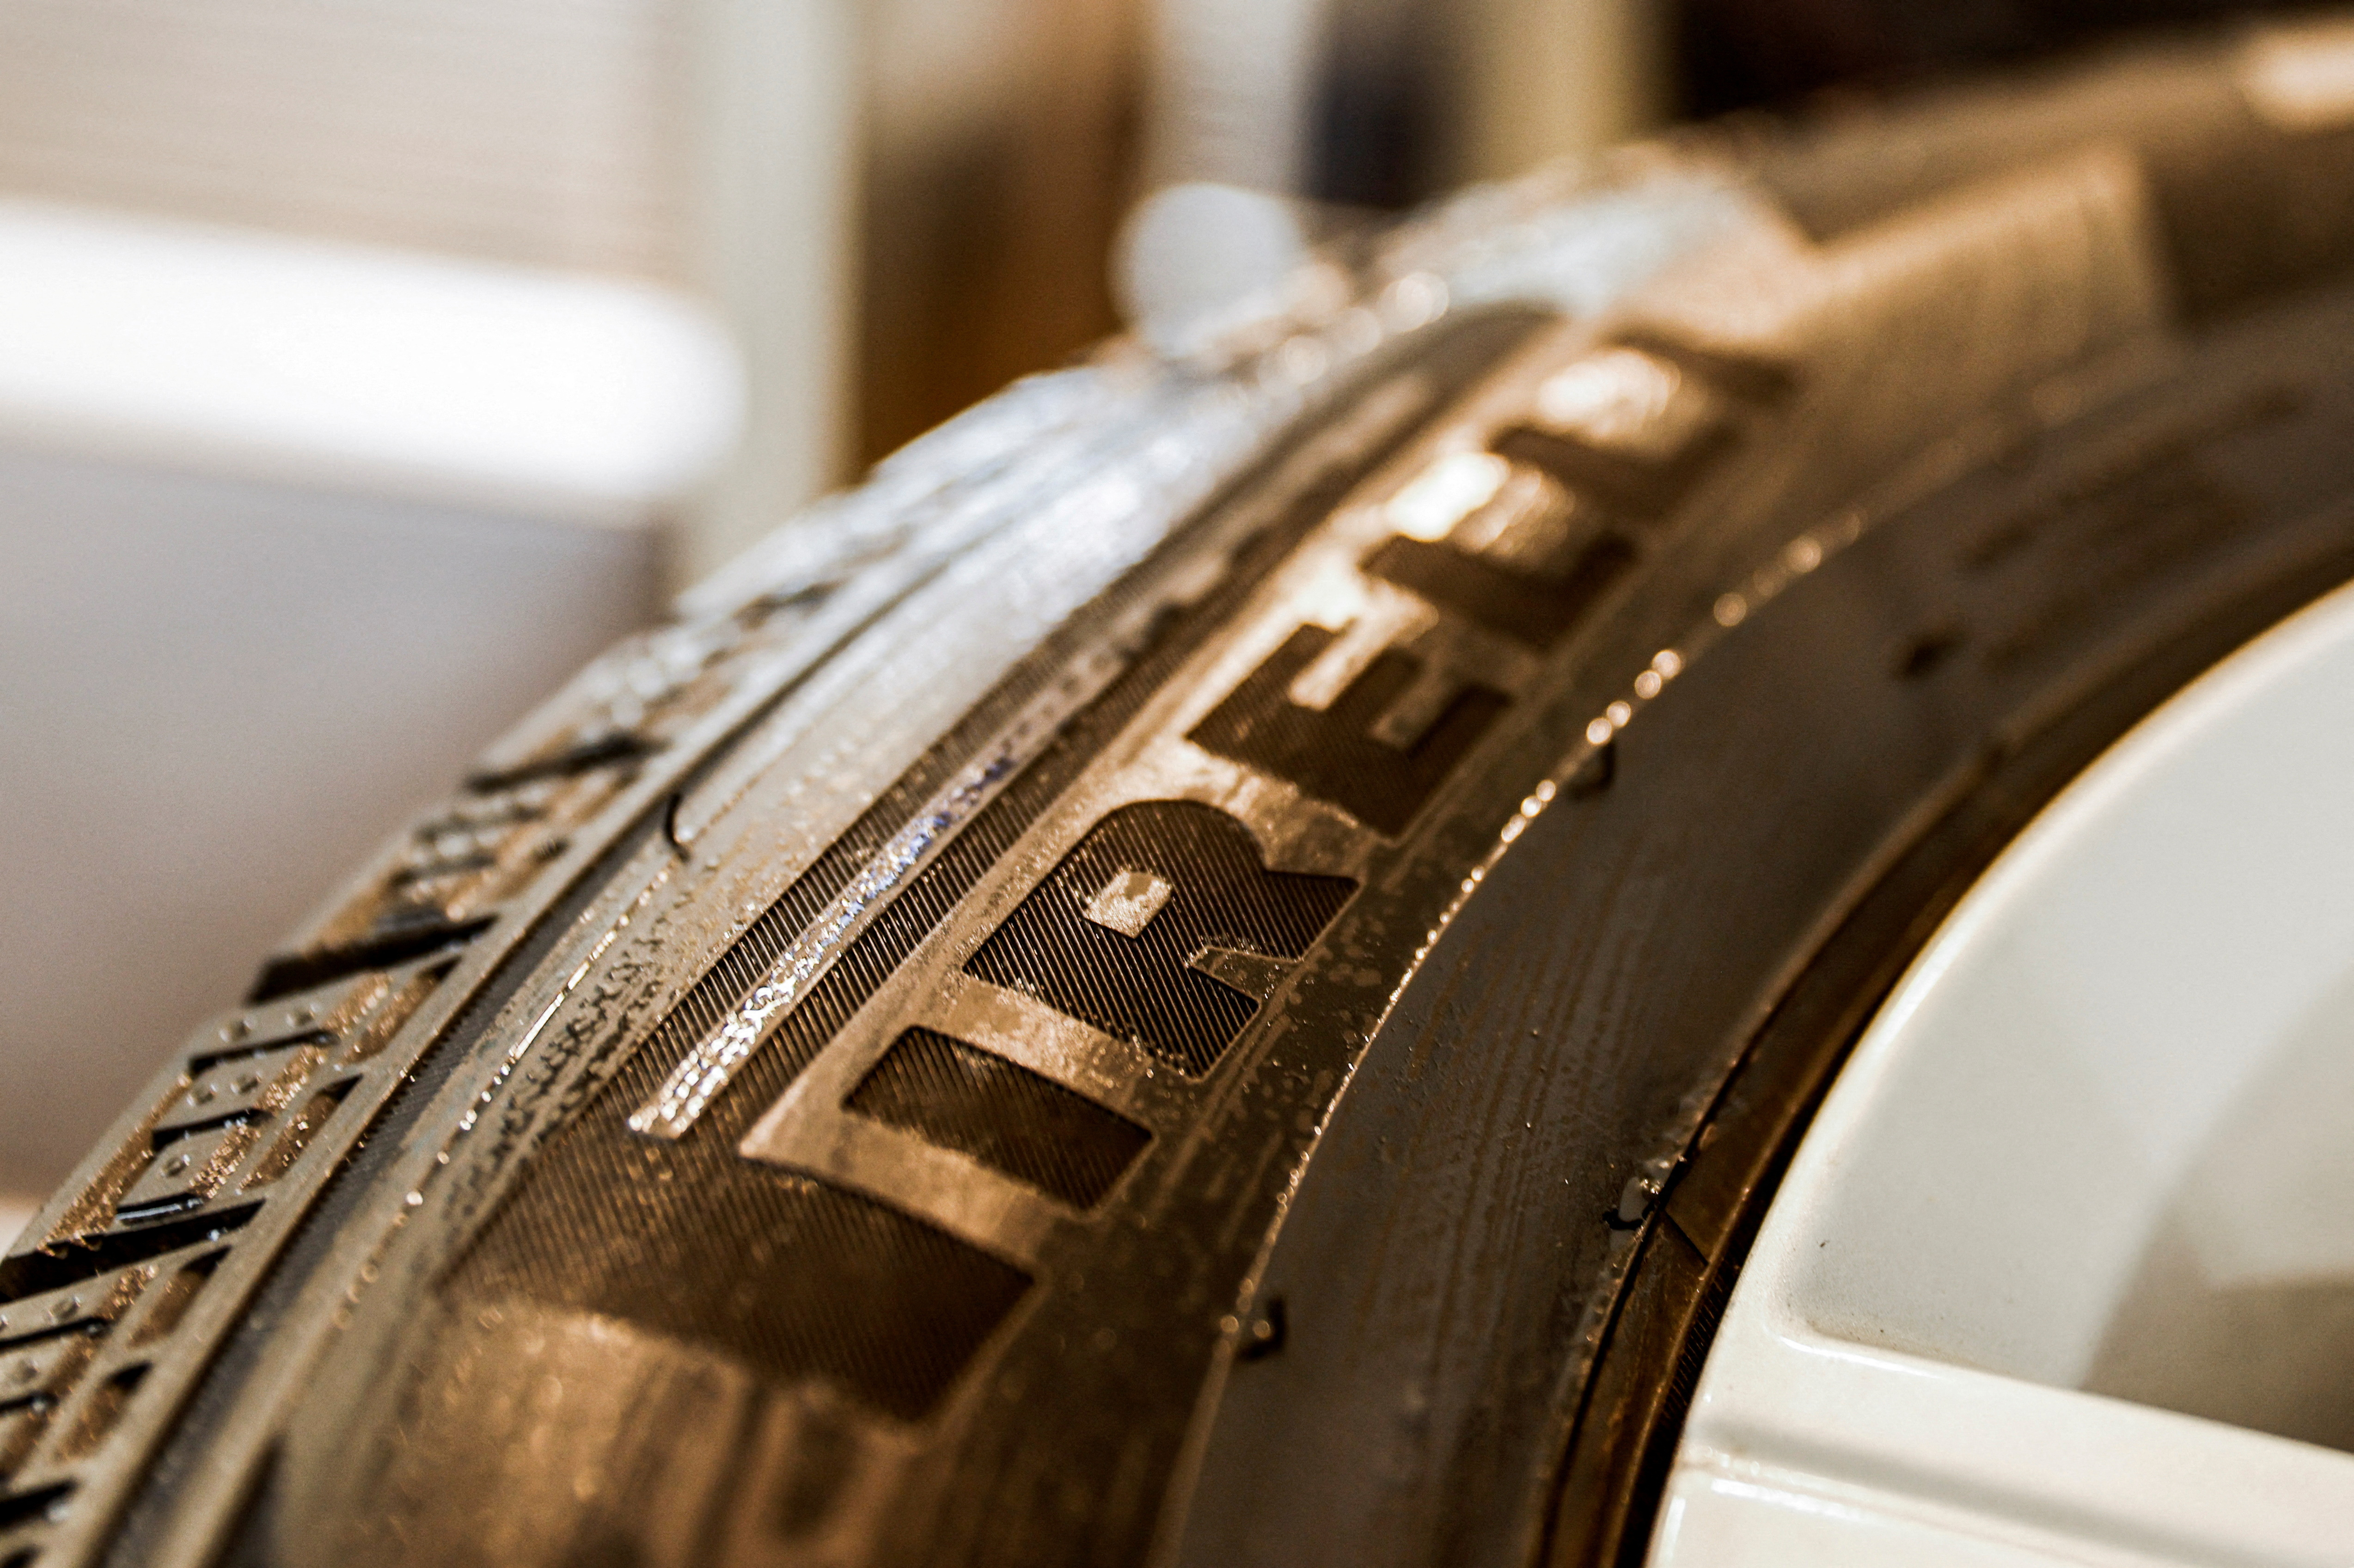 A tyre produced by the Italian company Pirelli is on display at a dealership in Moscow